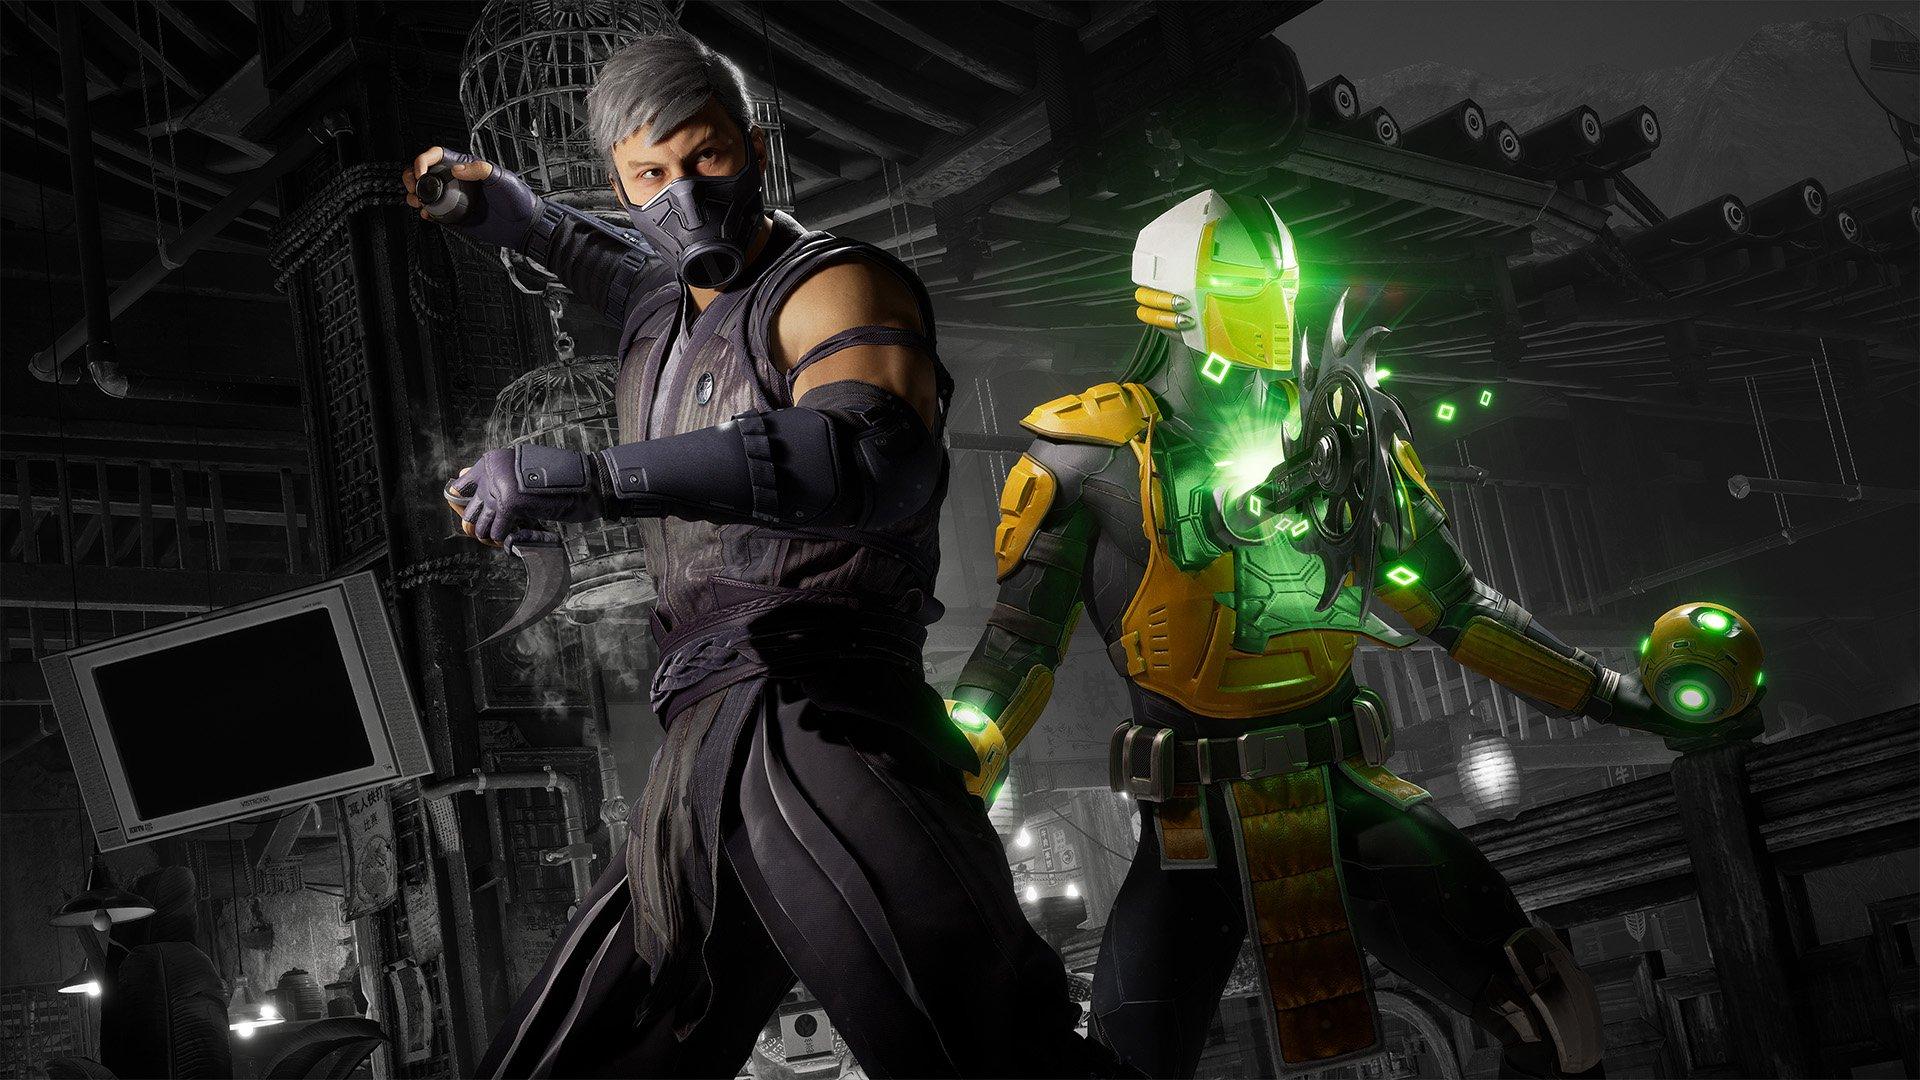 Ranking Every Mortal Kombat Game From Worst To Best - Game Informer